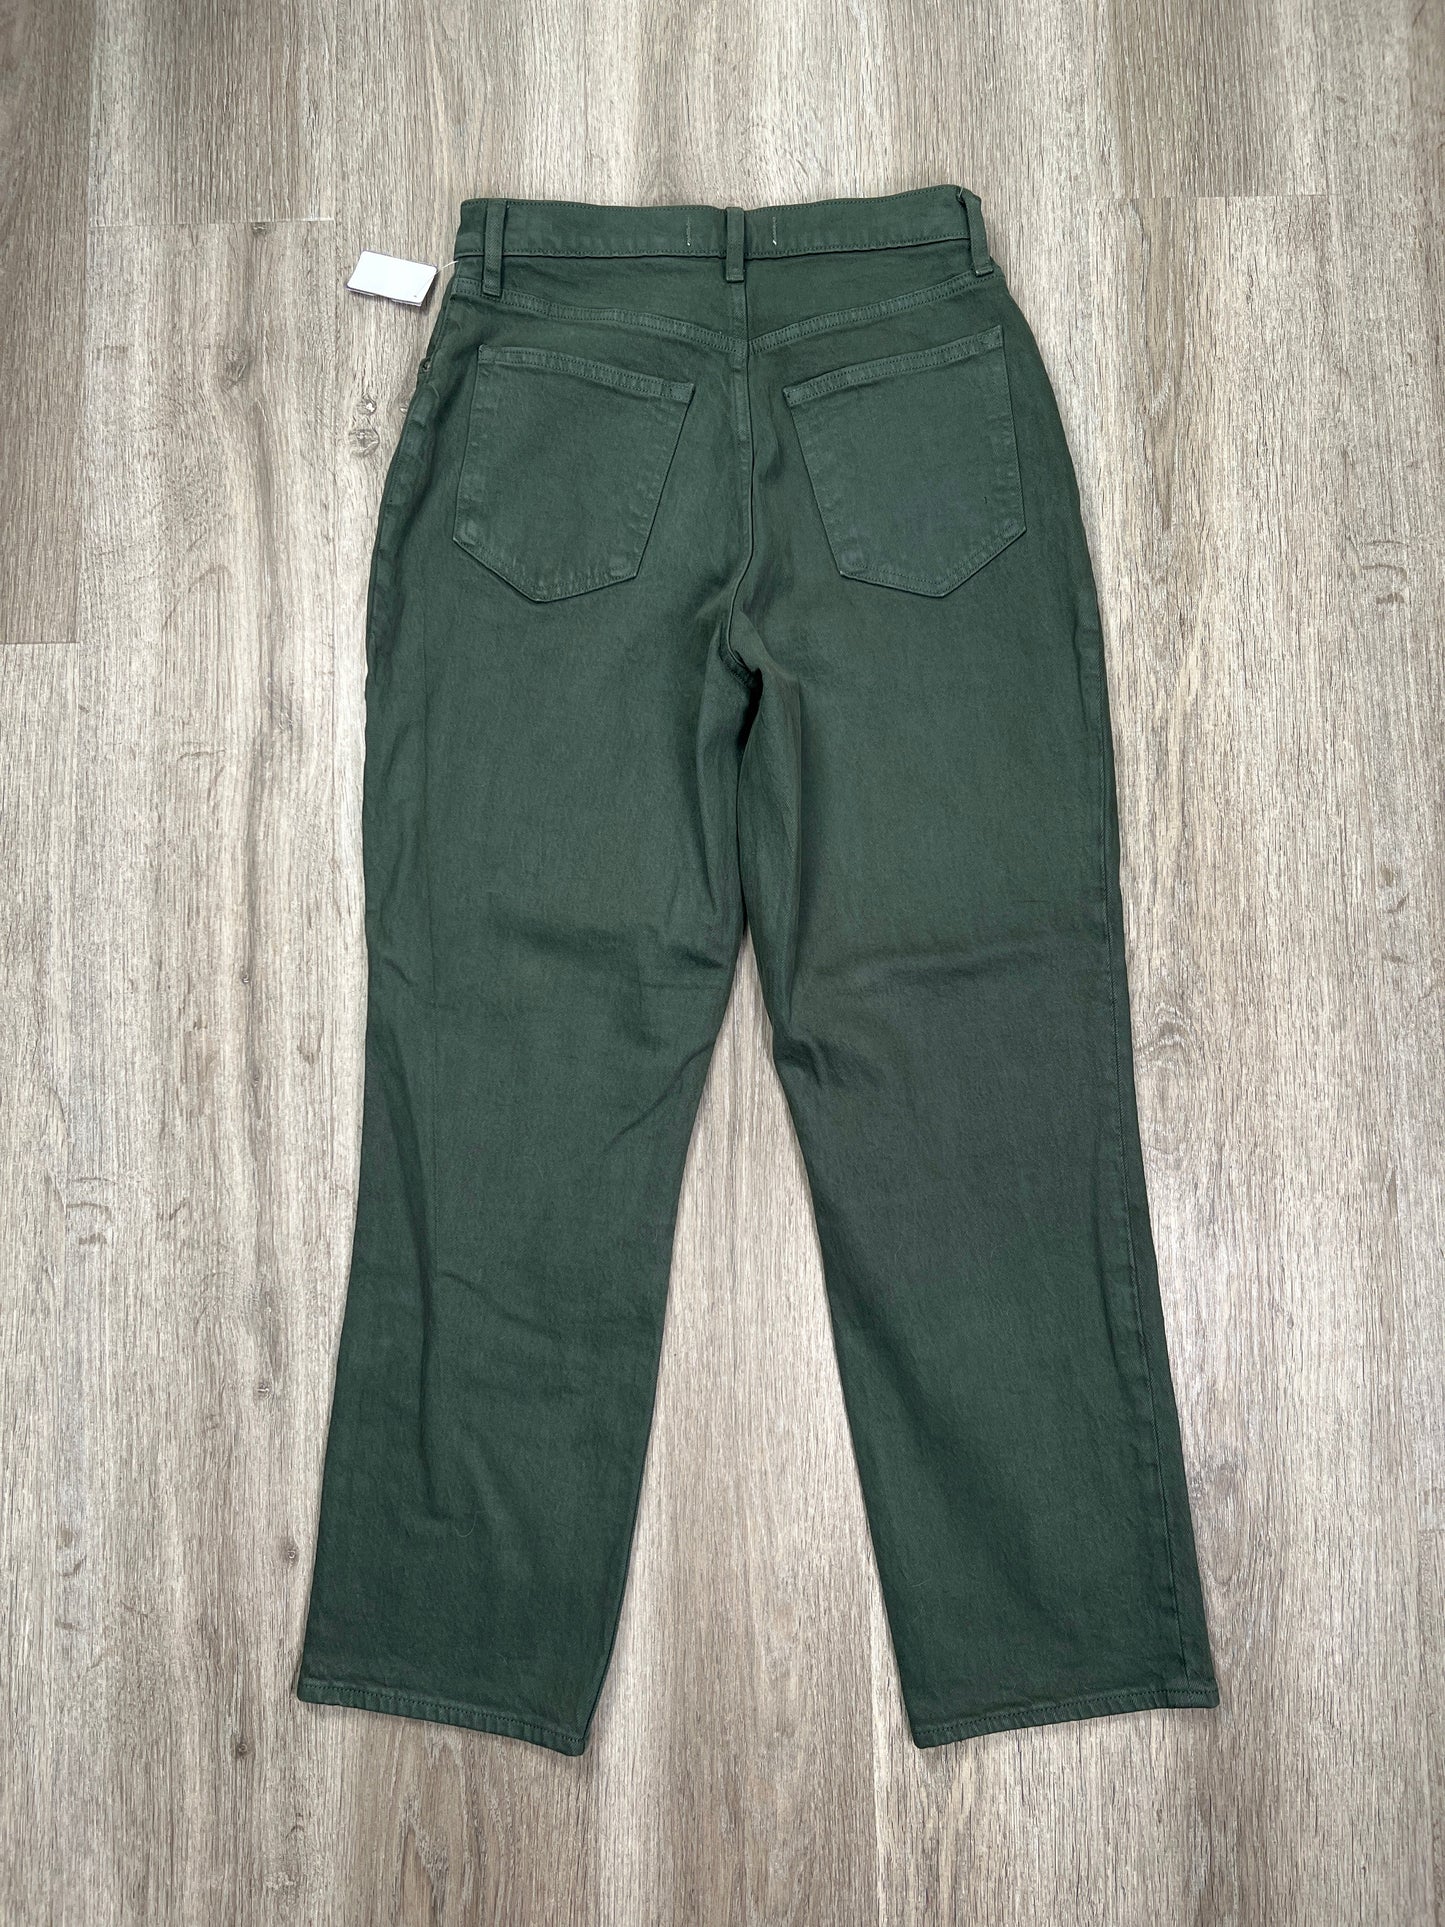 Green Denim Jeans Straight Abercrombie And Fitch, Size 8